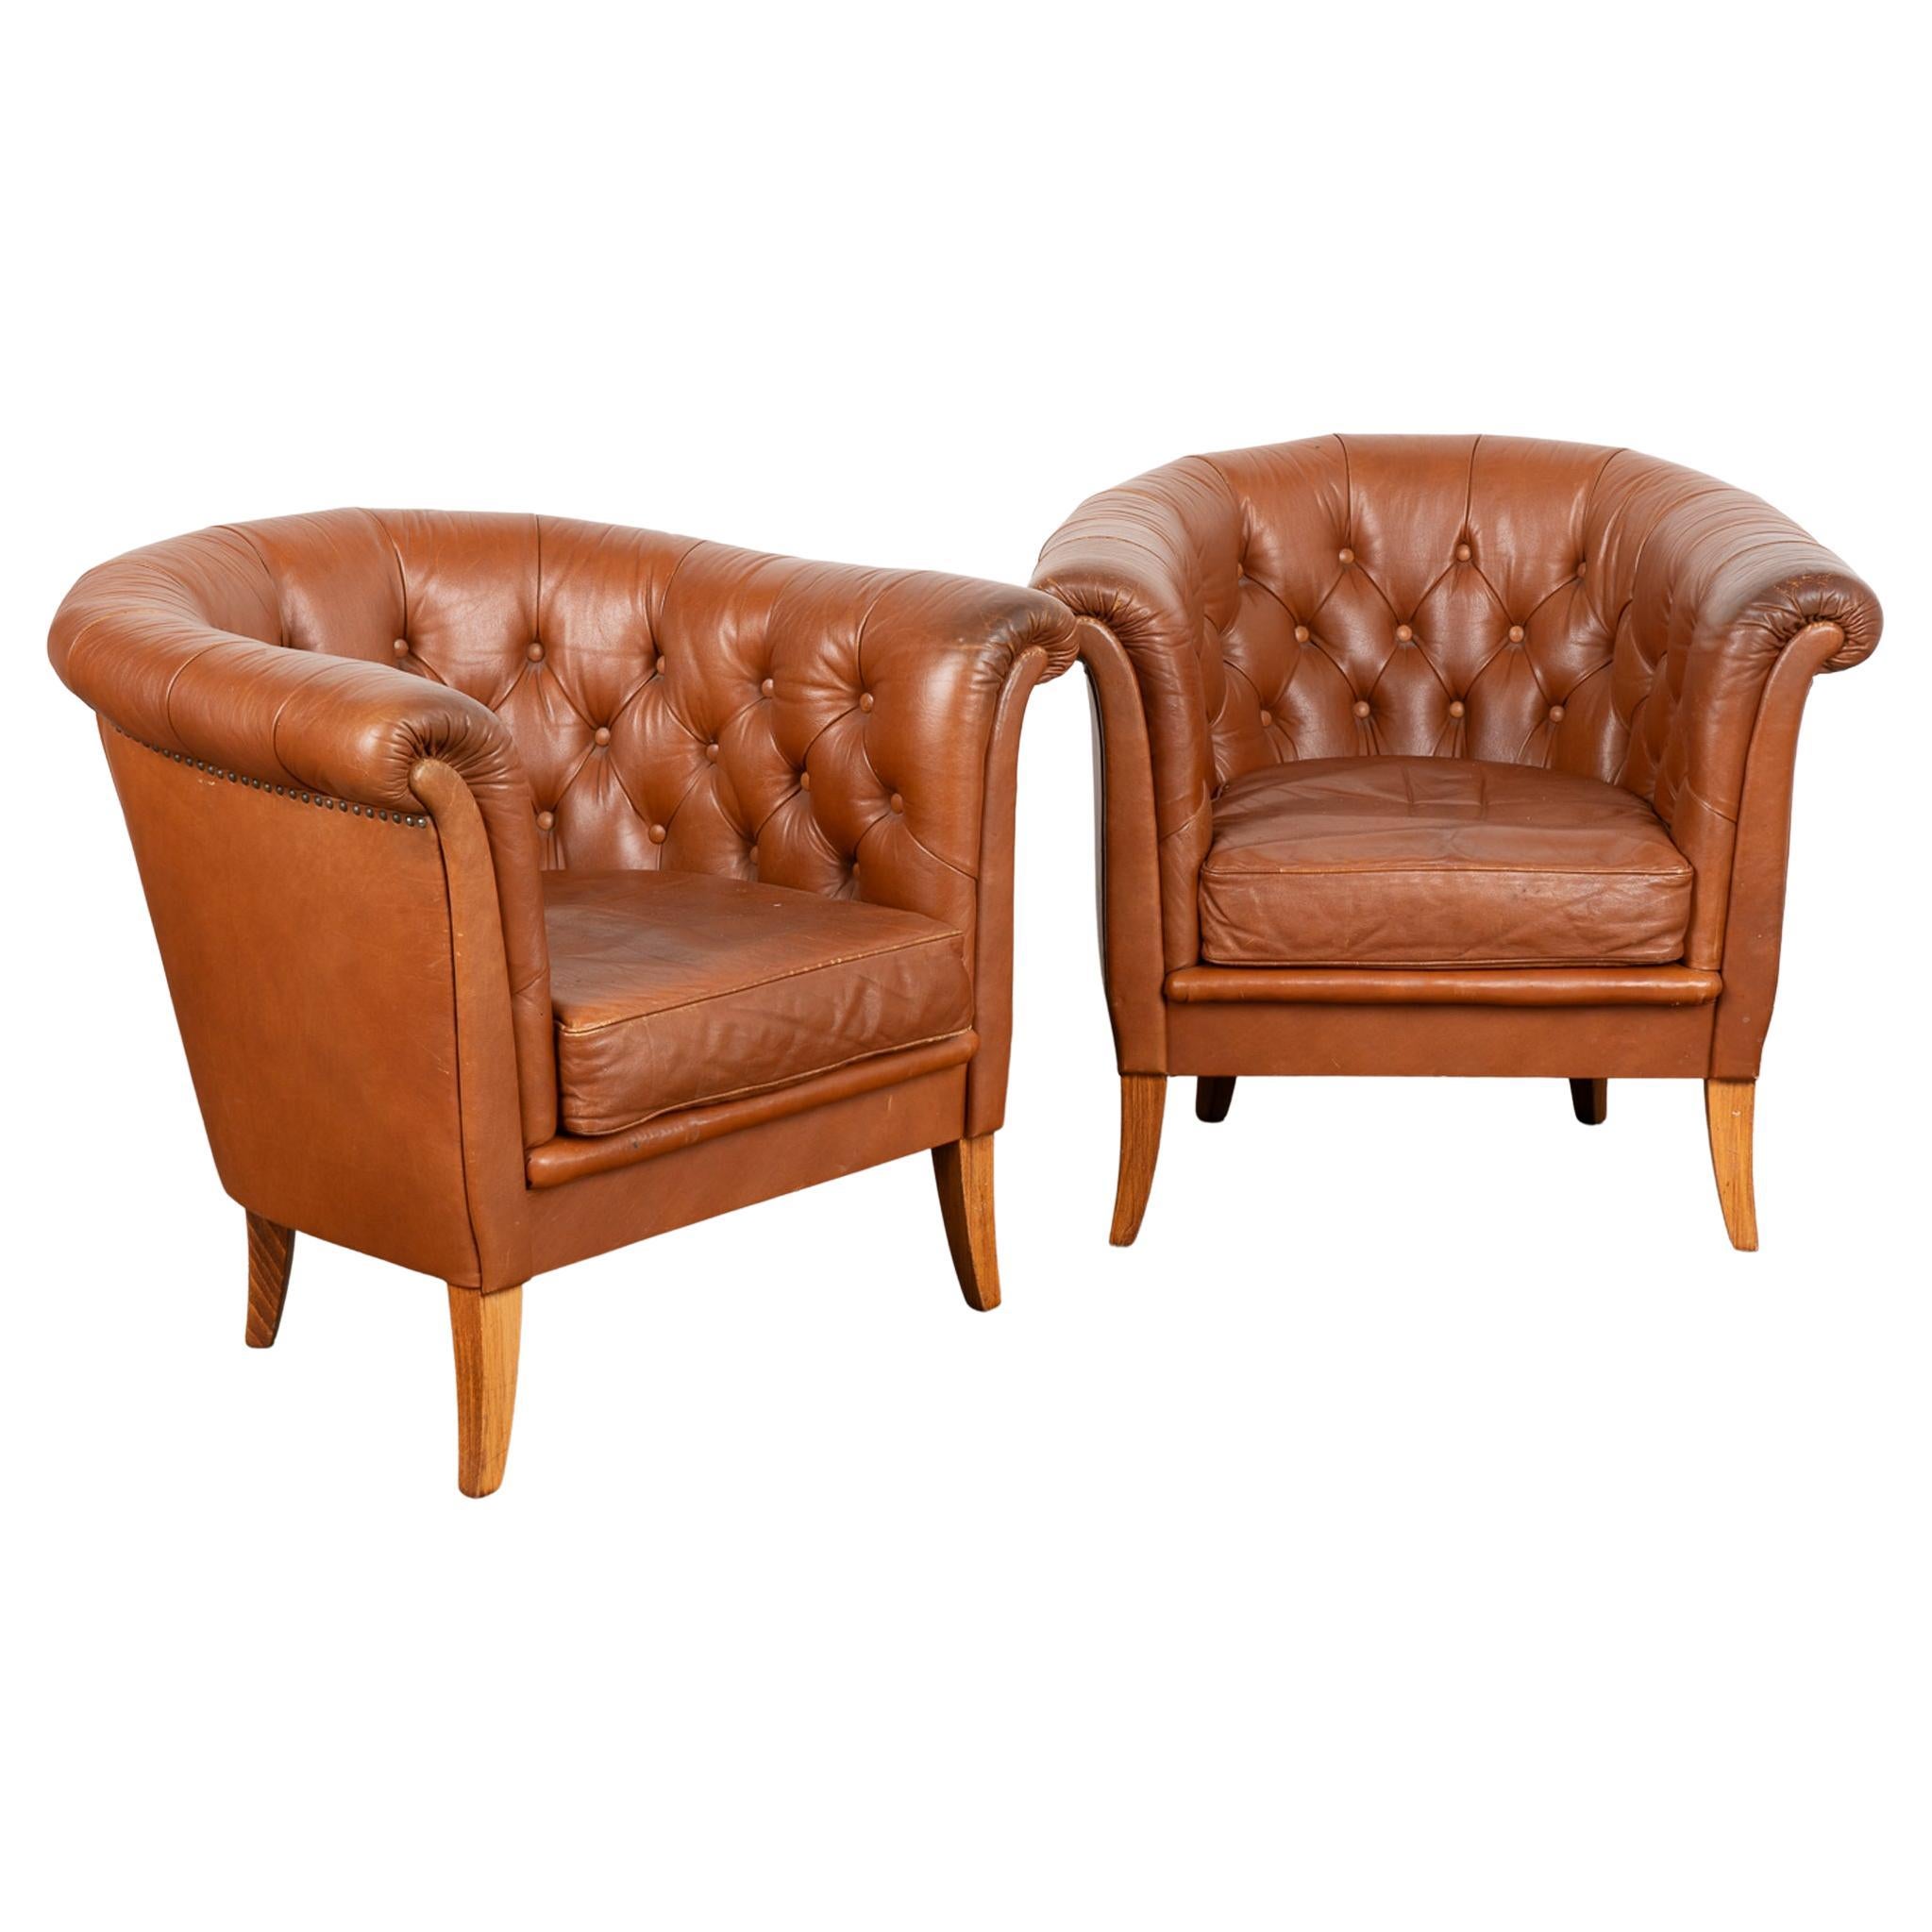 Pair, Mid Century Brown Leather Barrel Back Arm Chairs, Denmark circa 1960-70